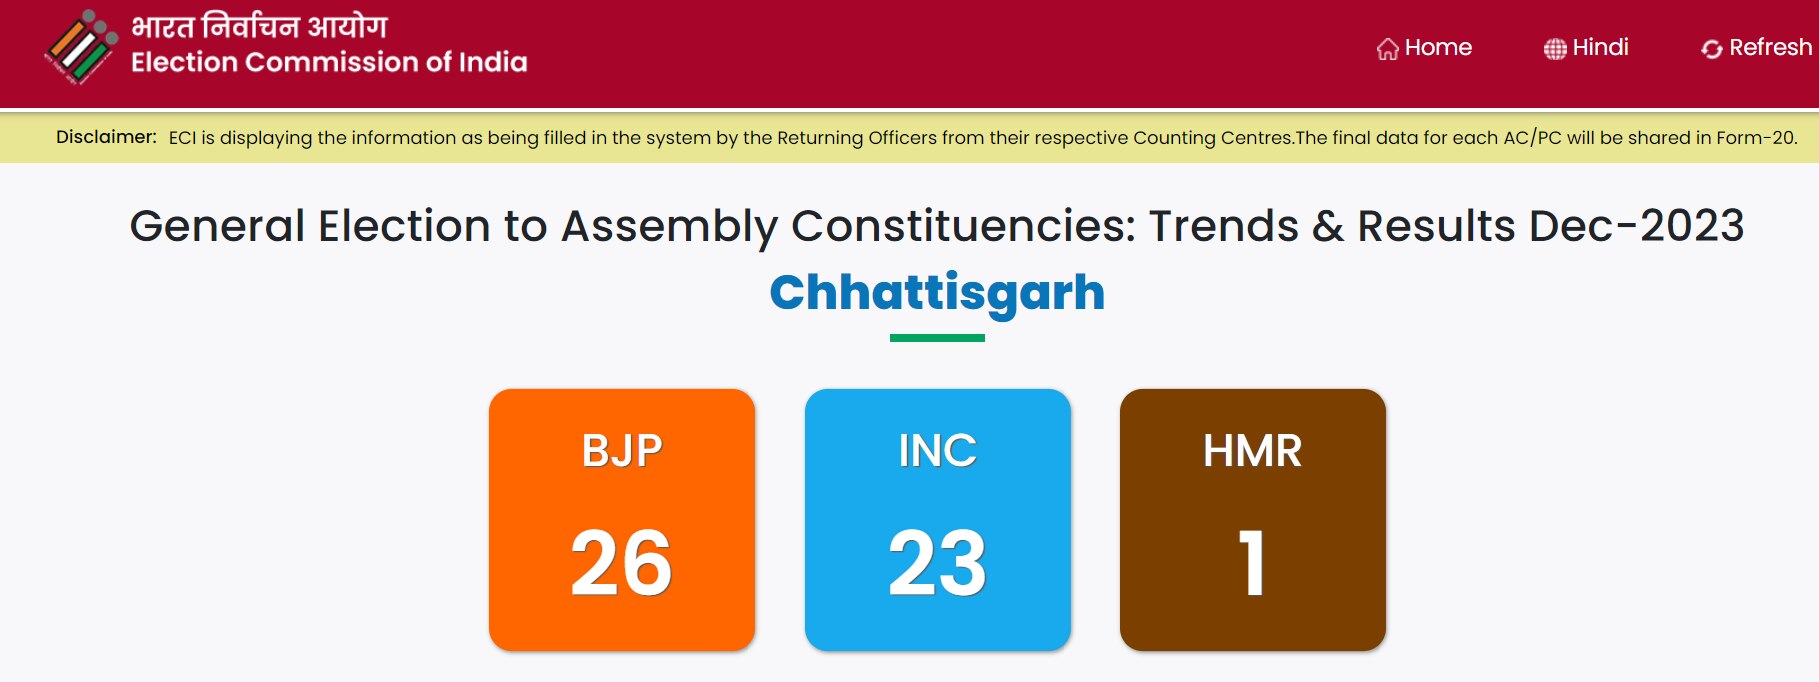 Chhattisgarh Election Results: See-Saw Battle Between BJP And Congress, Show ECI Trends